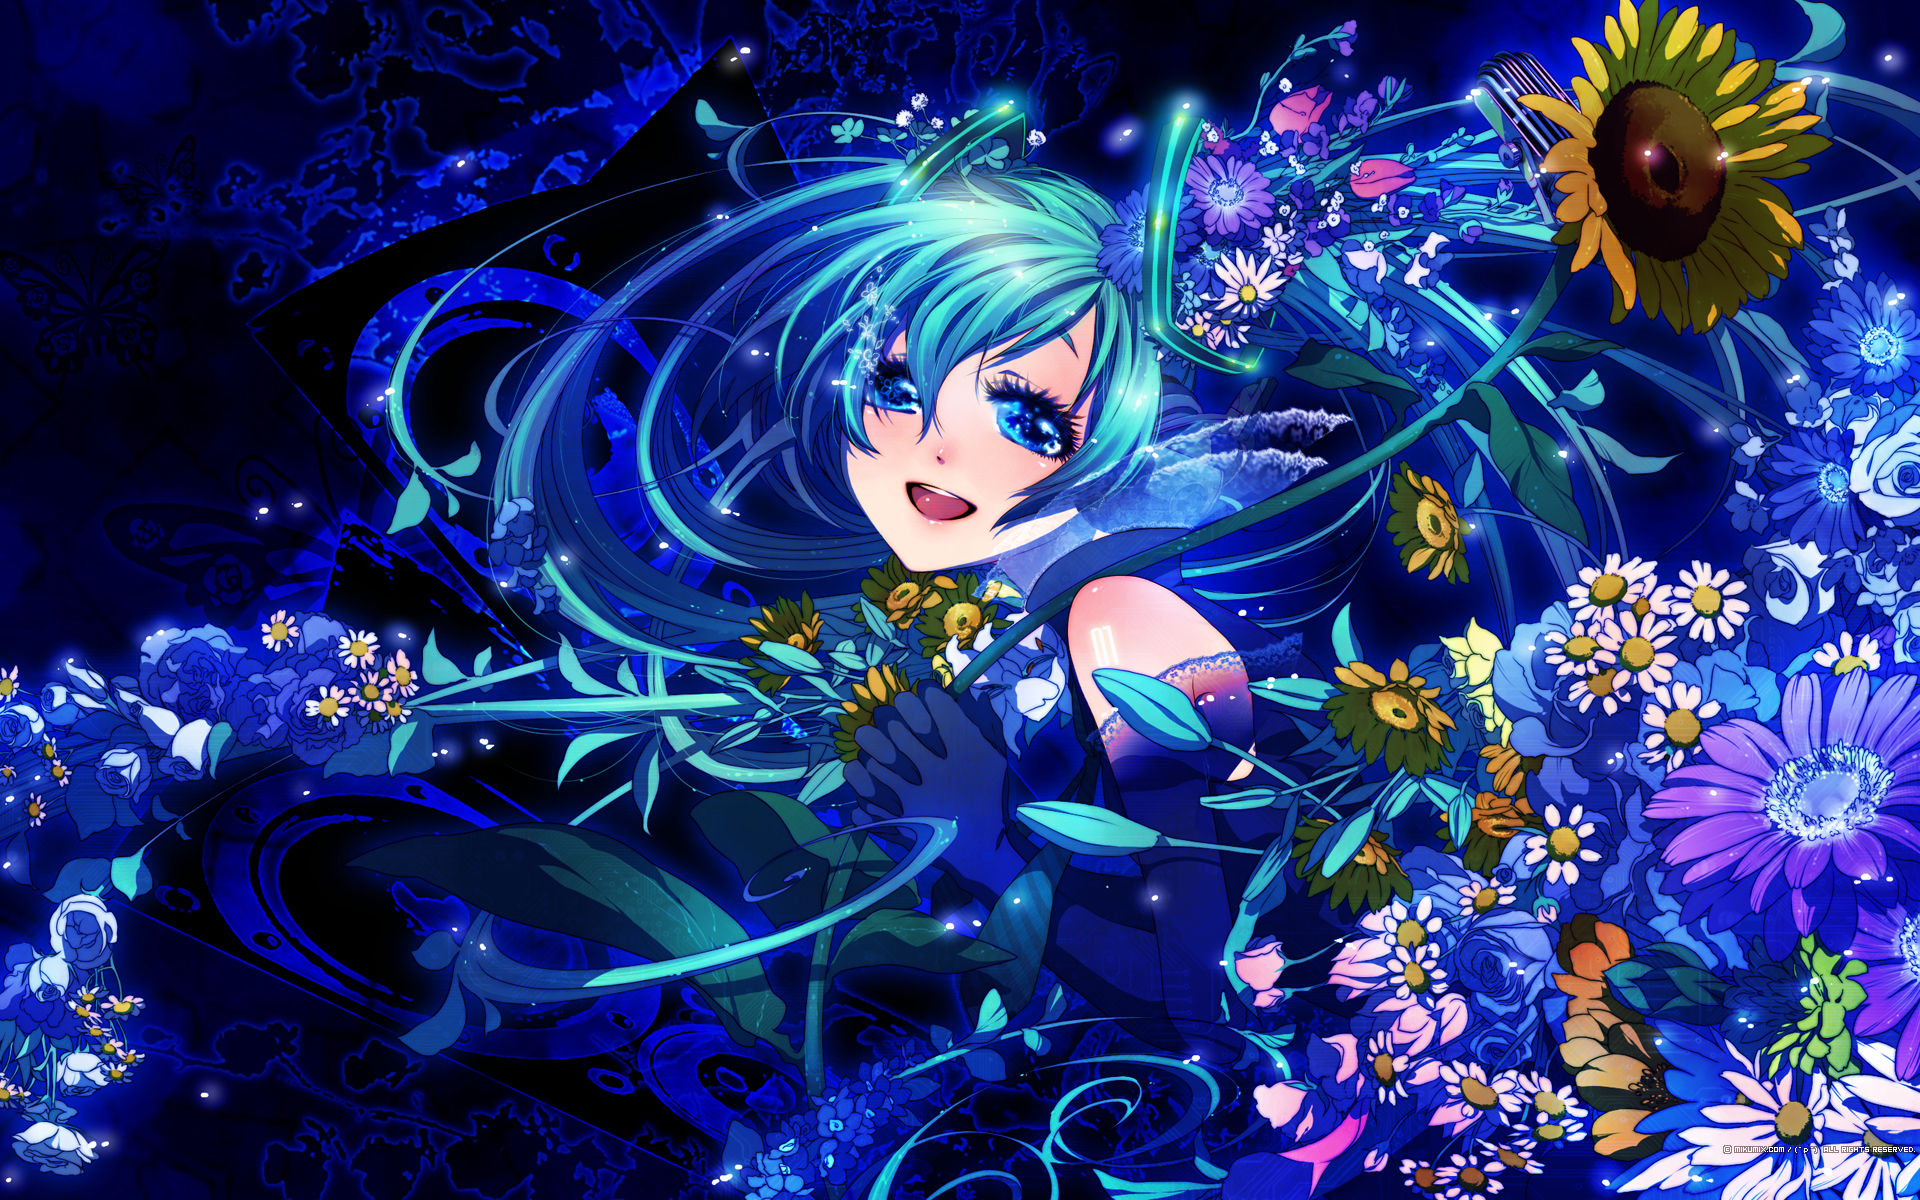 Mikumix_wp030 by (^p^)